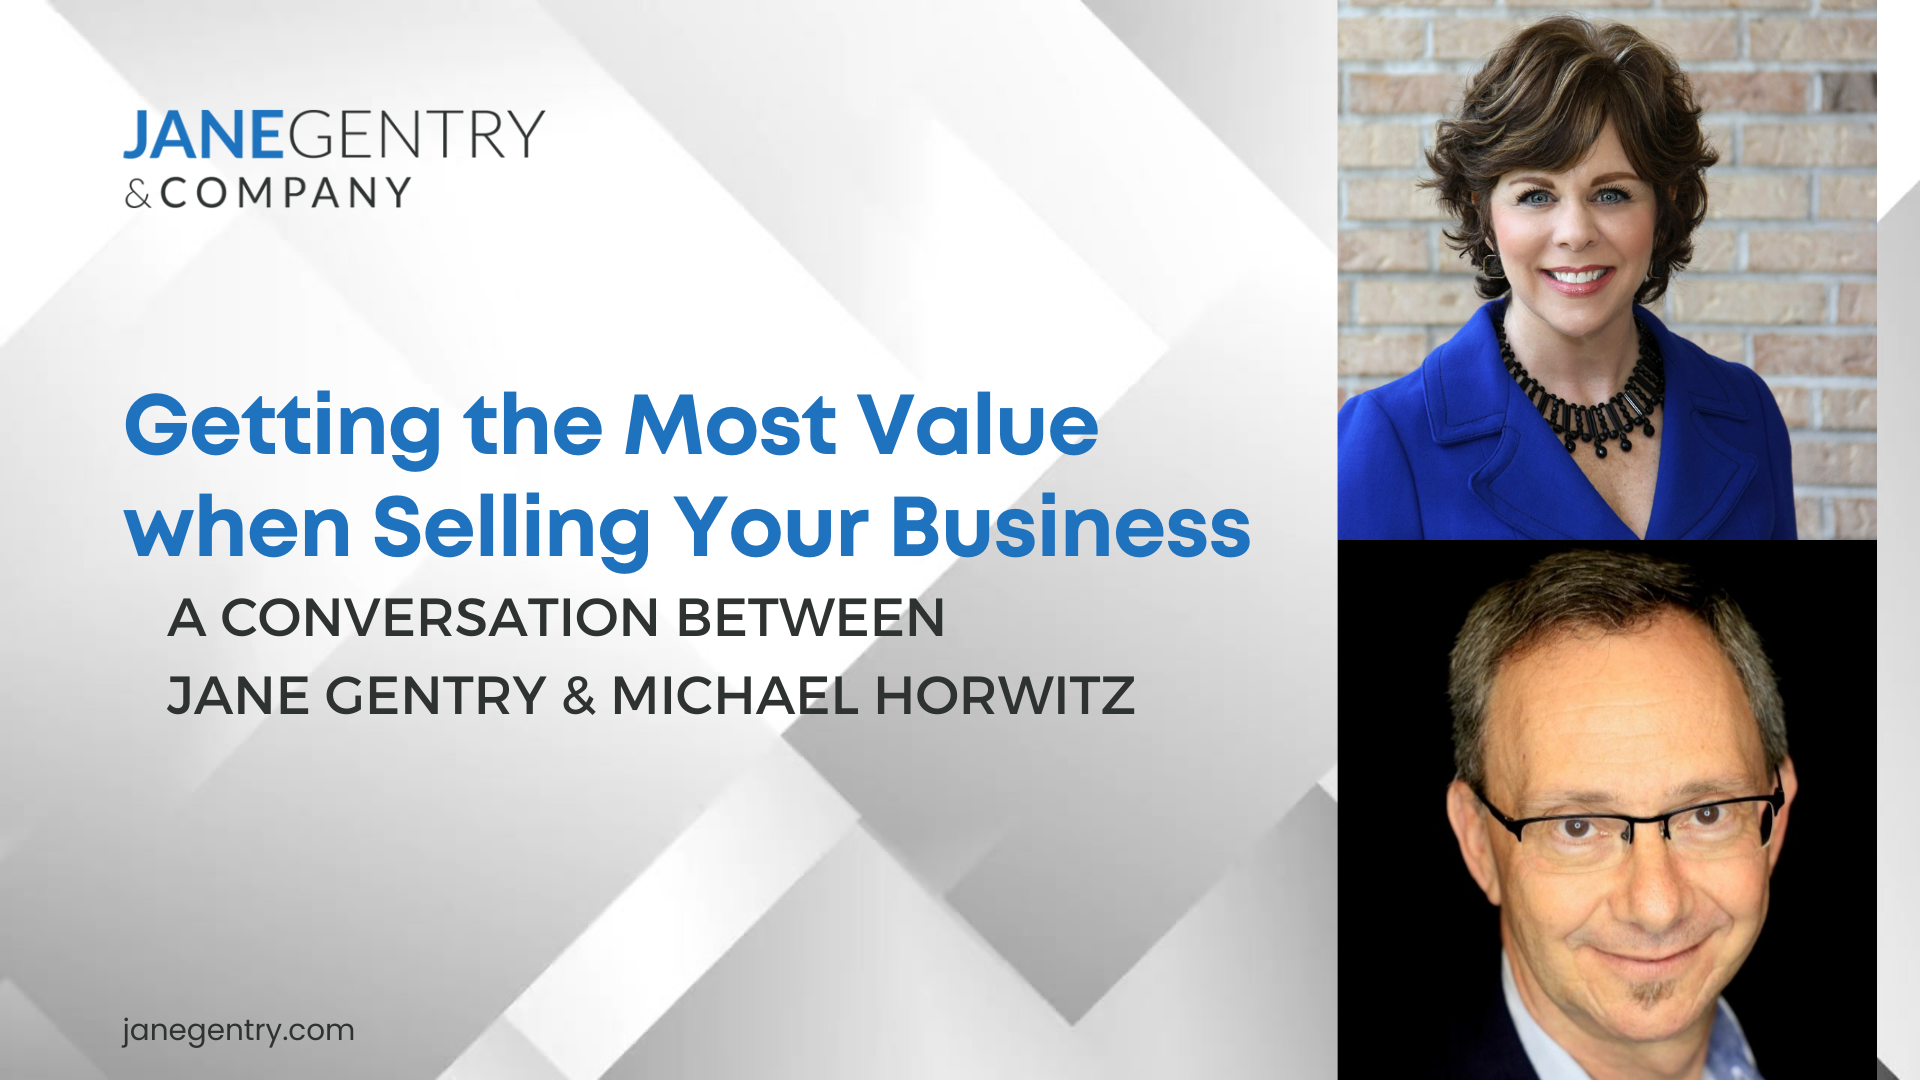 Get The Most Value when Selling Your Business, Leadership Video Series